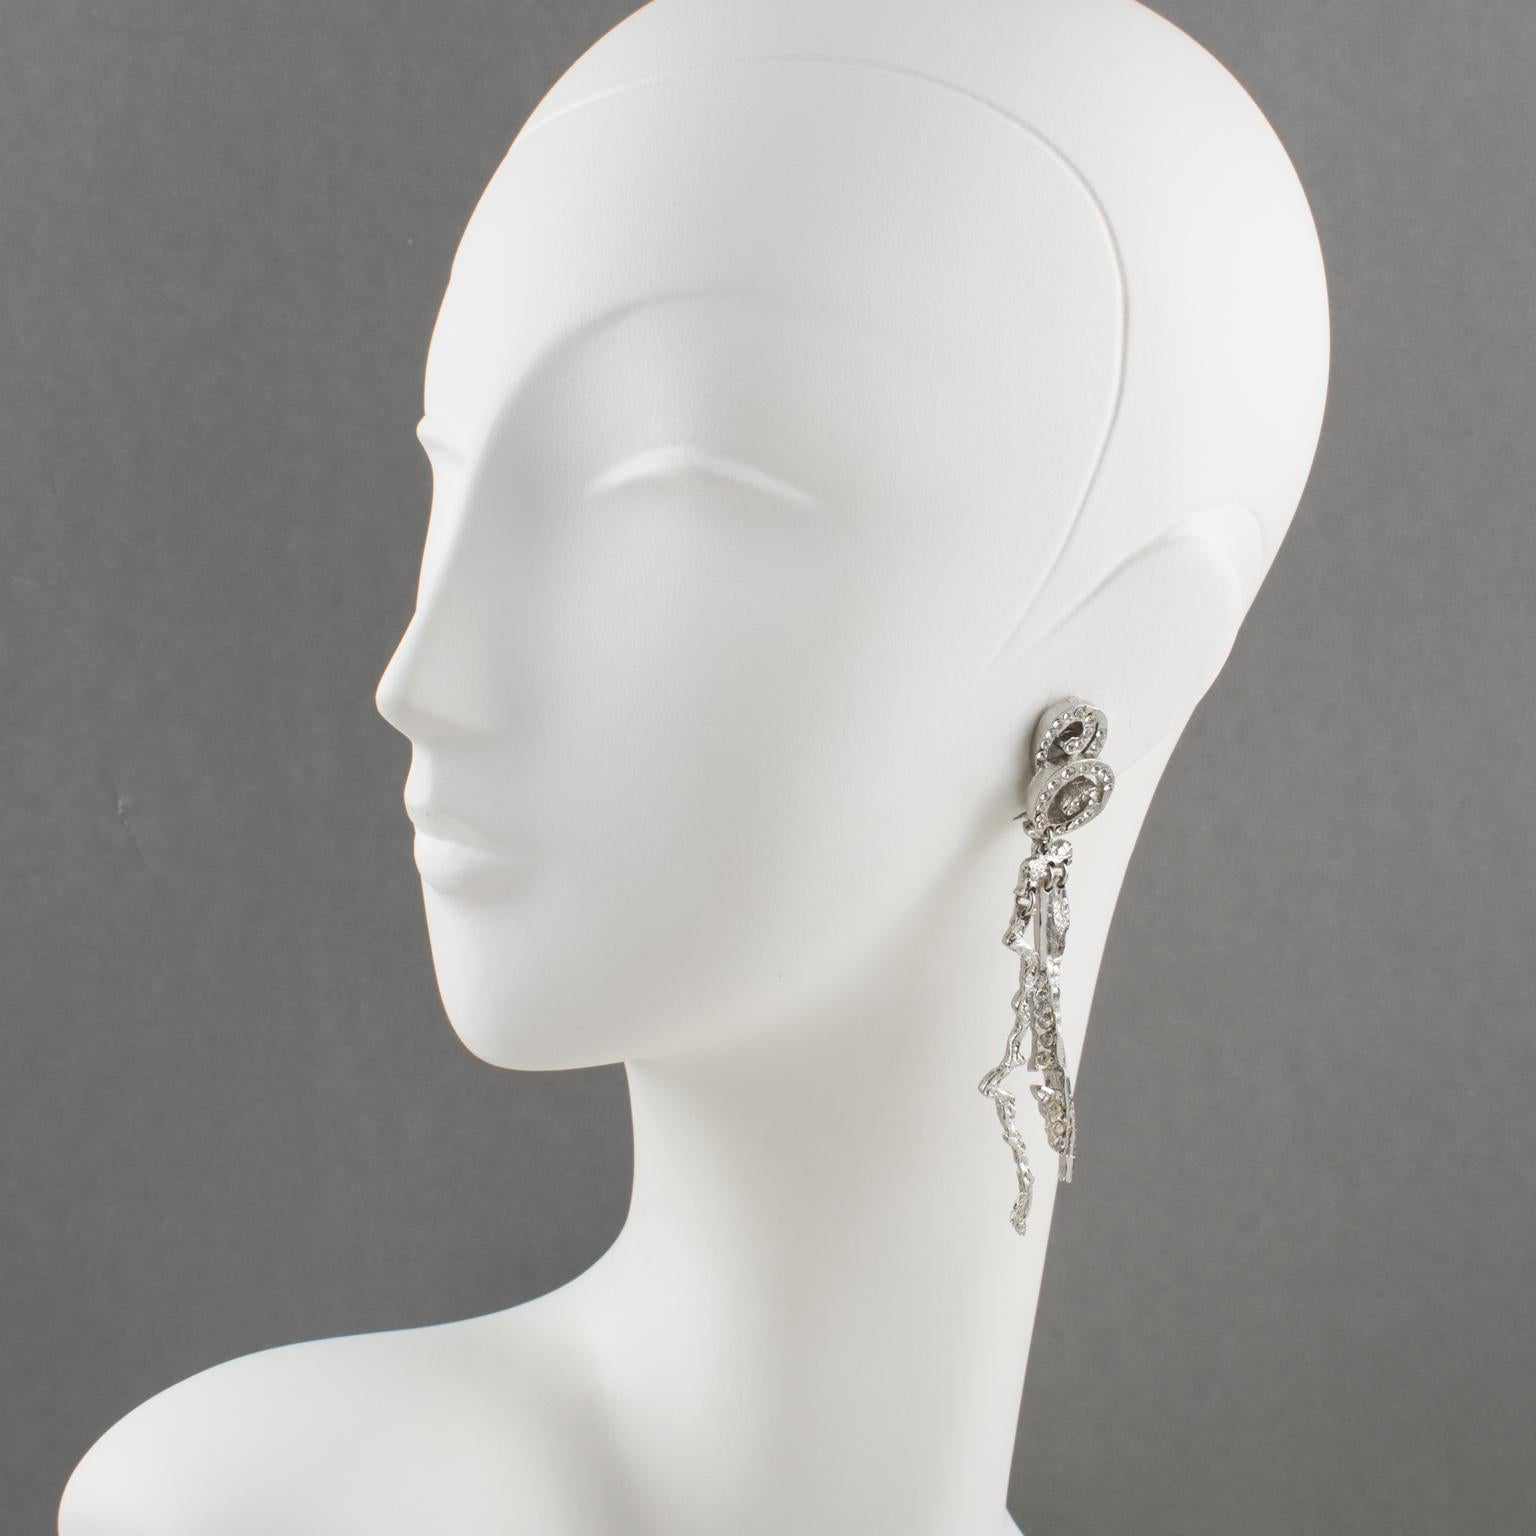 Superb Christian Lacroix Paris futurist clip-on earrings. Featuring a long dimensional brutalist dangling shape, with silvered metal all carved and see-thru, compliment with crystal rhinestones. Engraved 